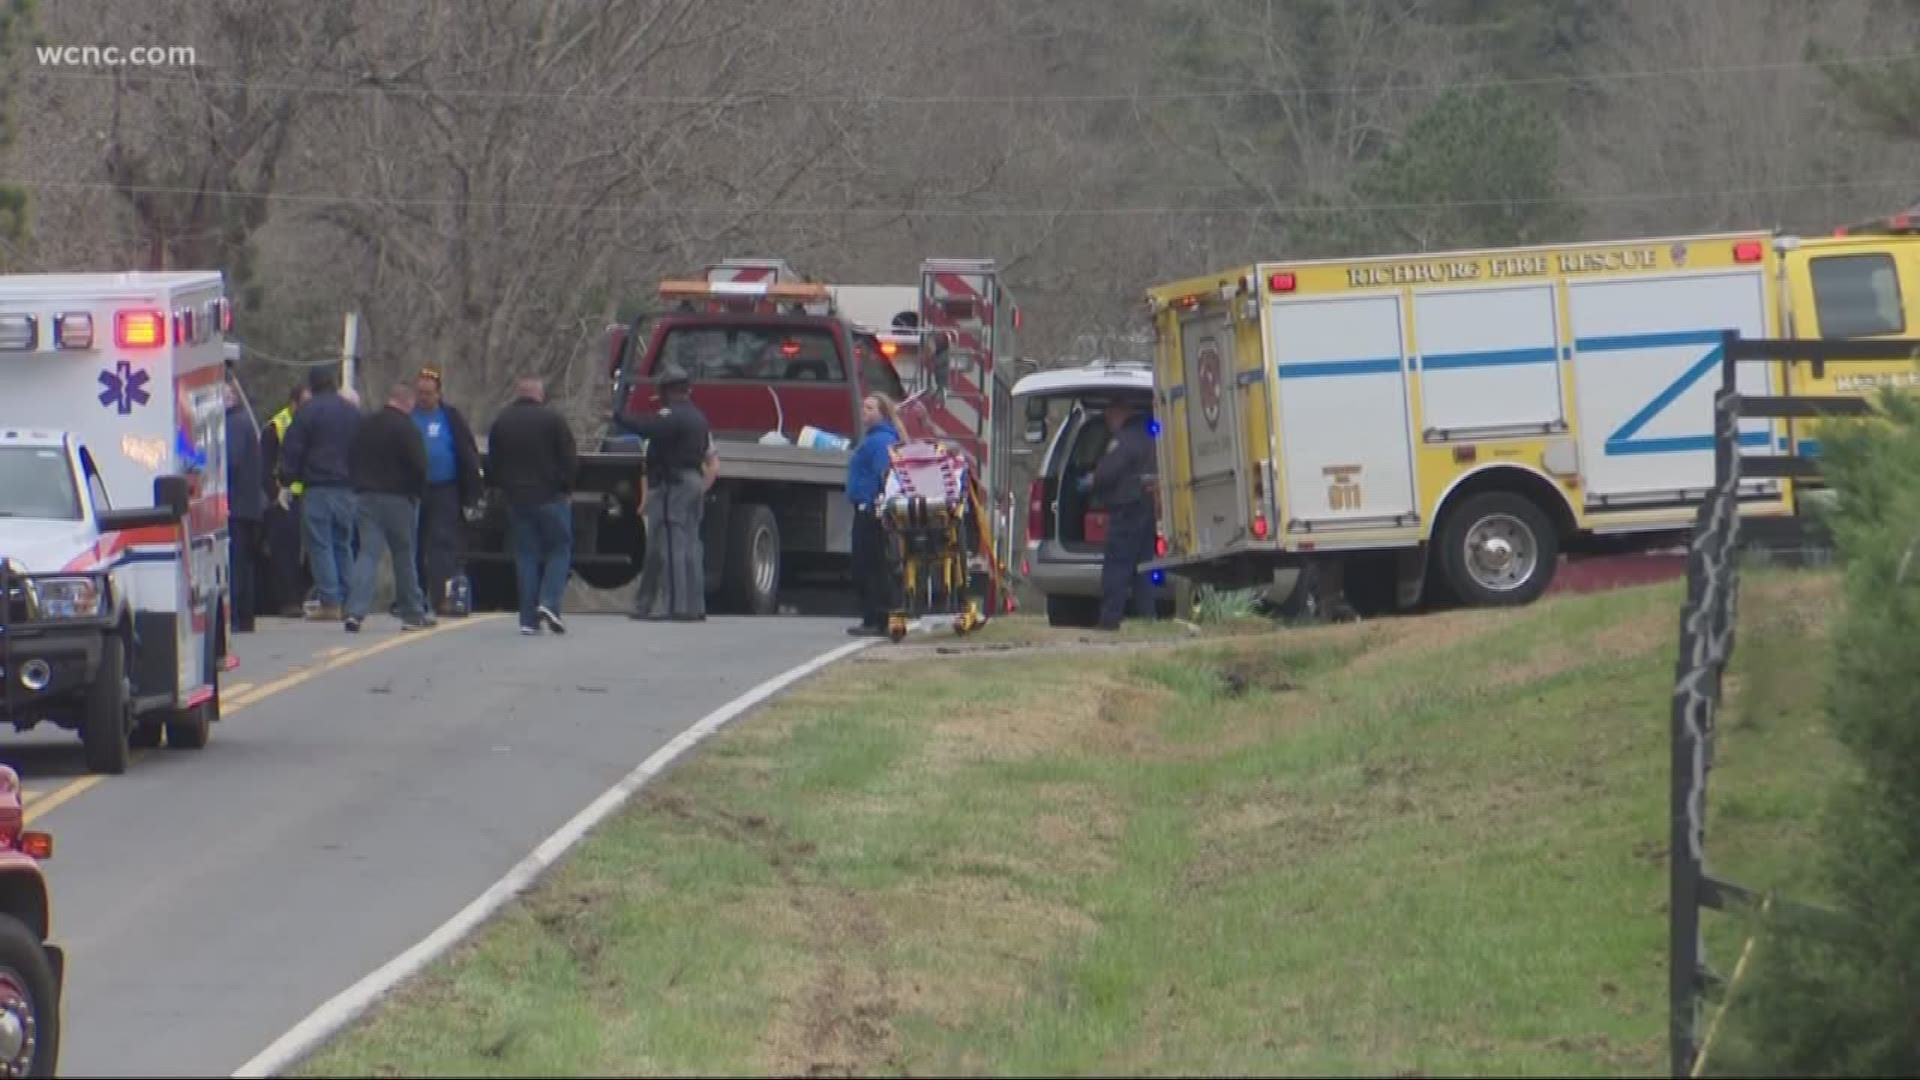 Coroners are investigating a deadly crash involving an ambulance in Chester County Wednesday afternoon.